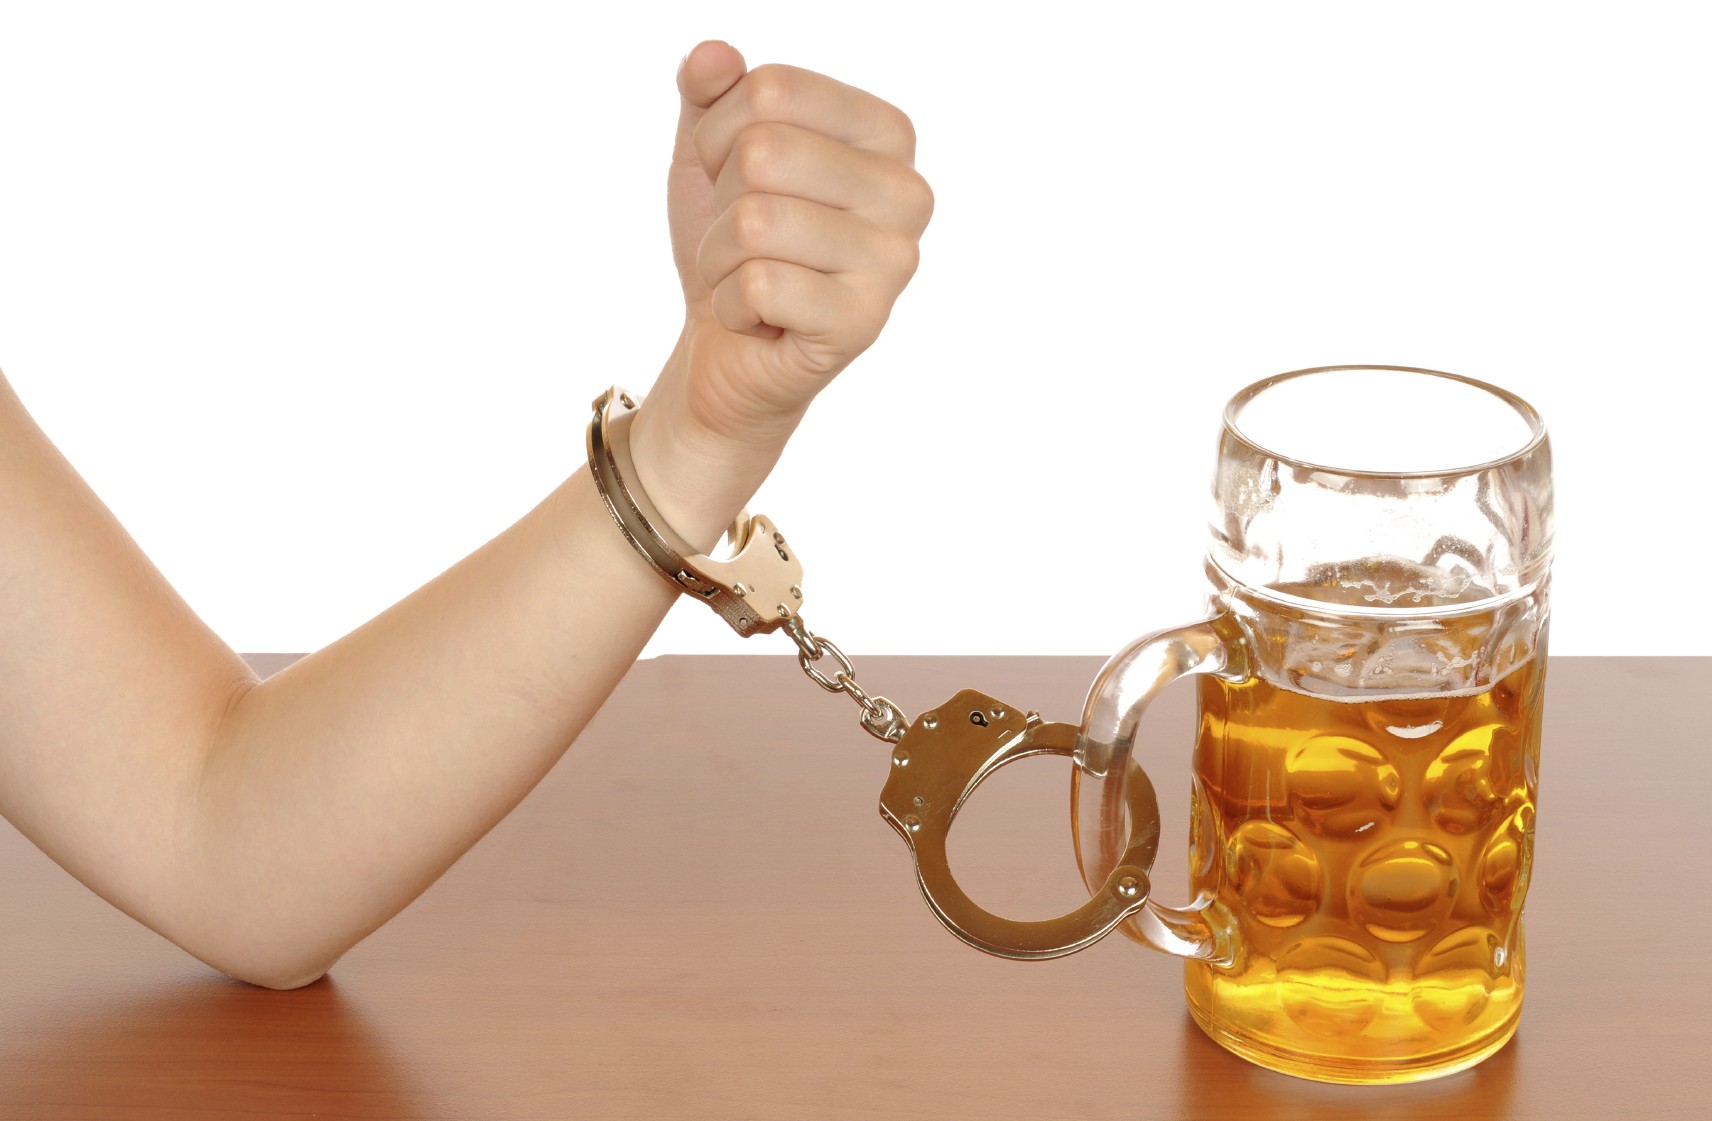 women handcuffed to alcohol drink